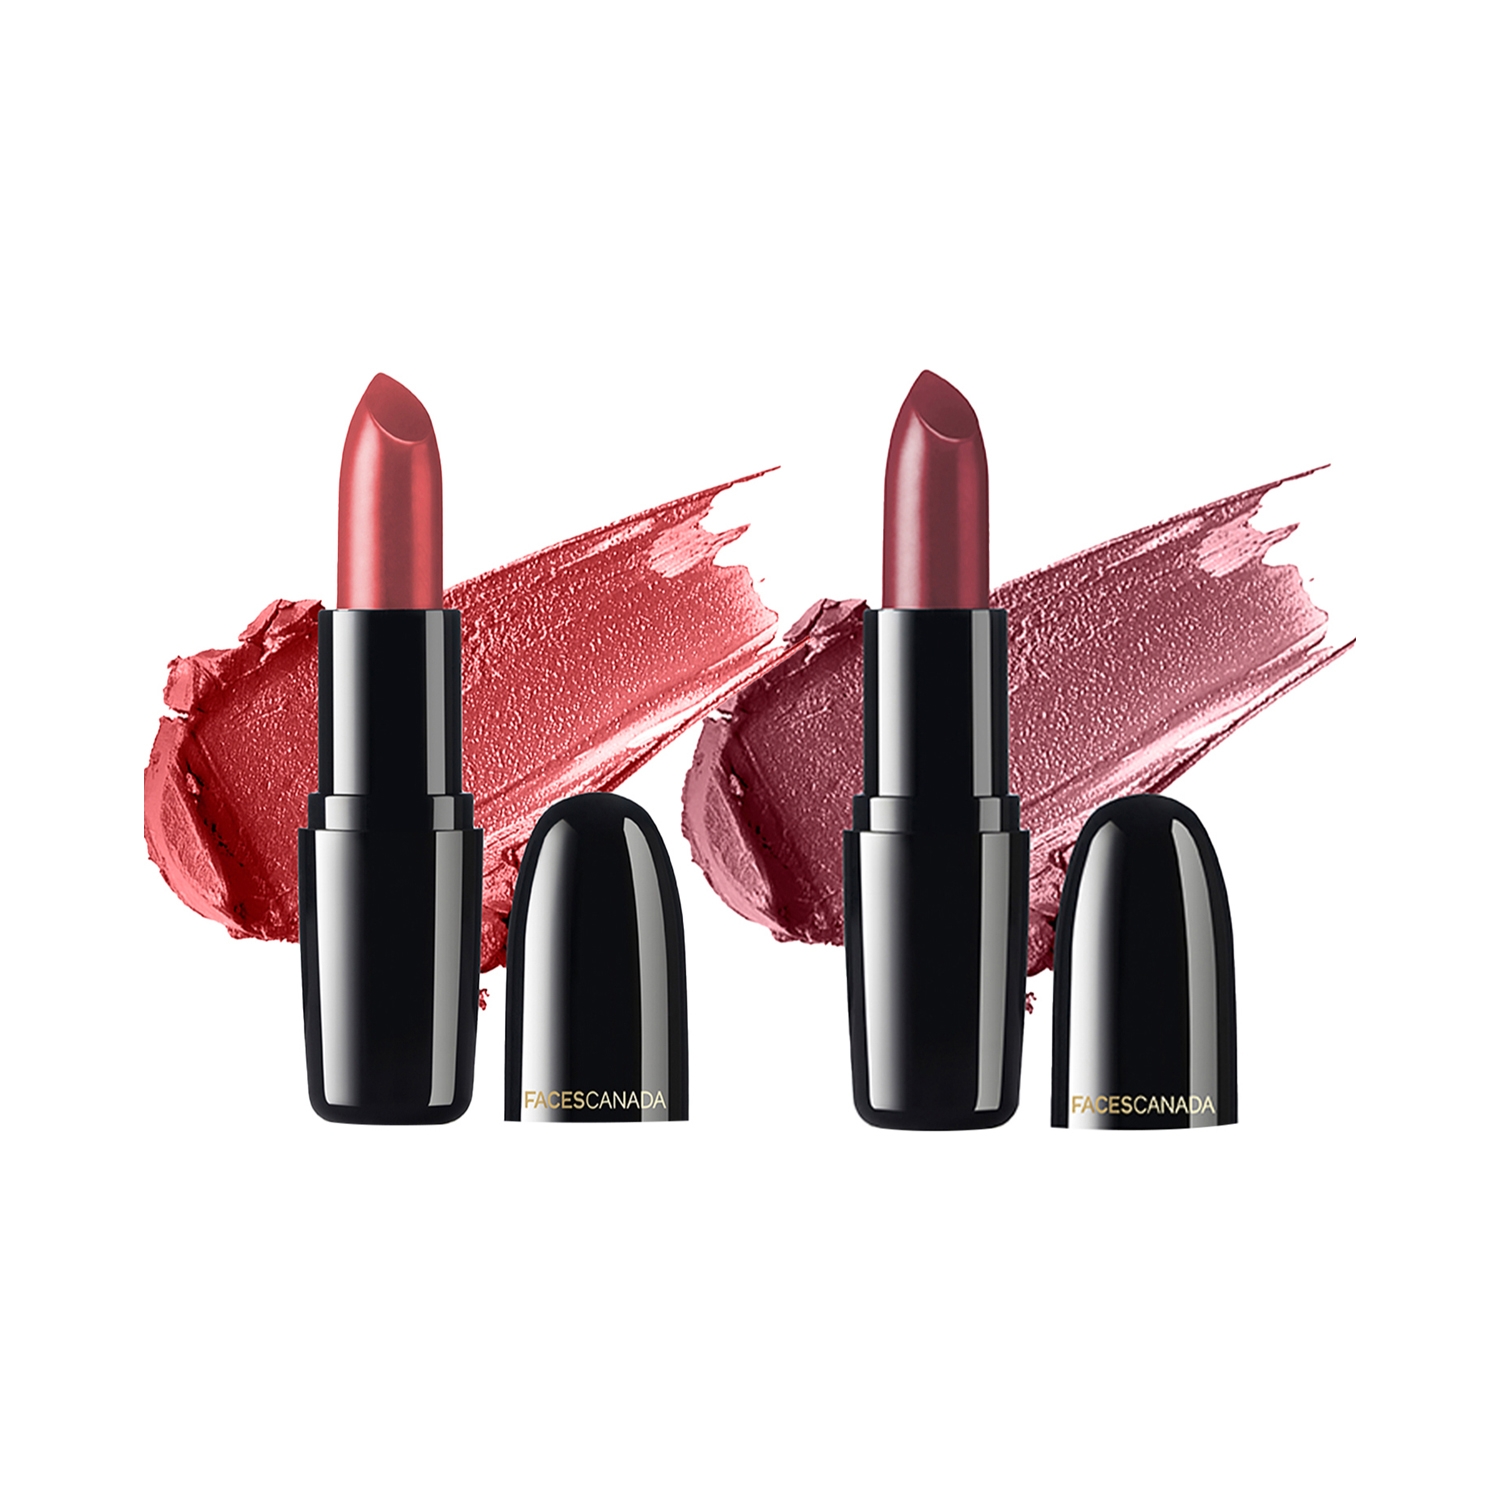 Faces Canada | Faces Canada Festive Pout Weightless Creme Lipstick Combo Pack - Amber, Love Nude (2pcs)